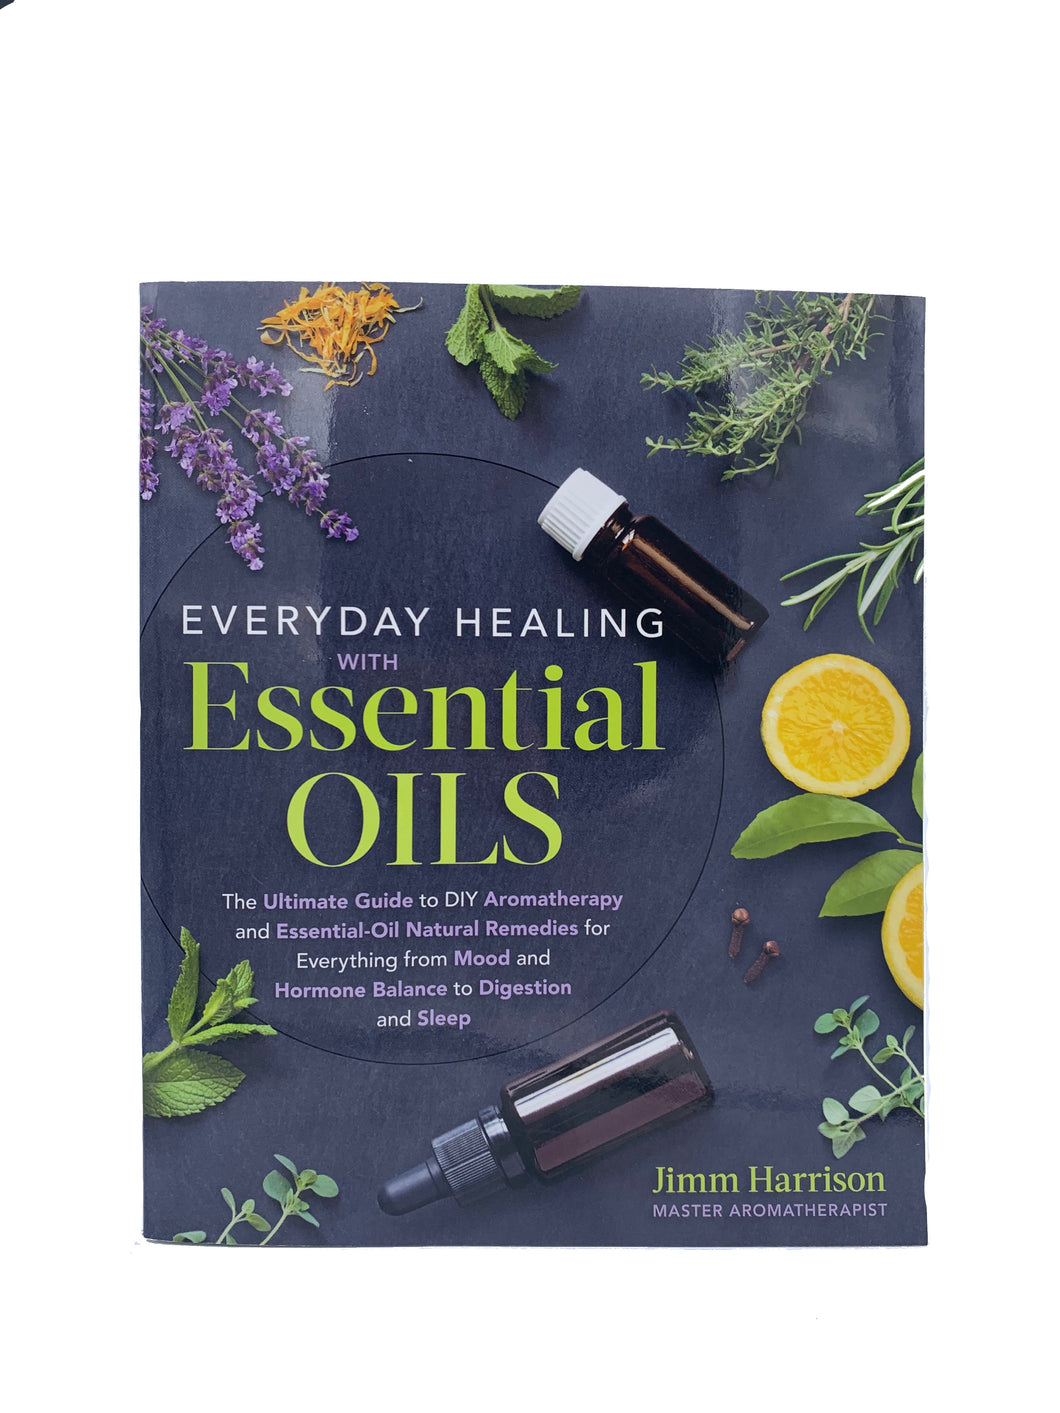 Everyday Healing with Essential Oils by Jimm Harrison